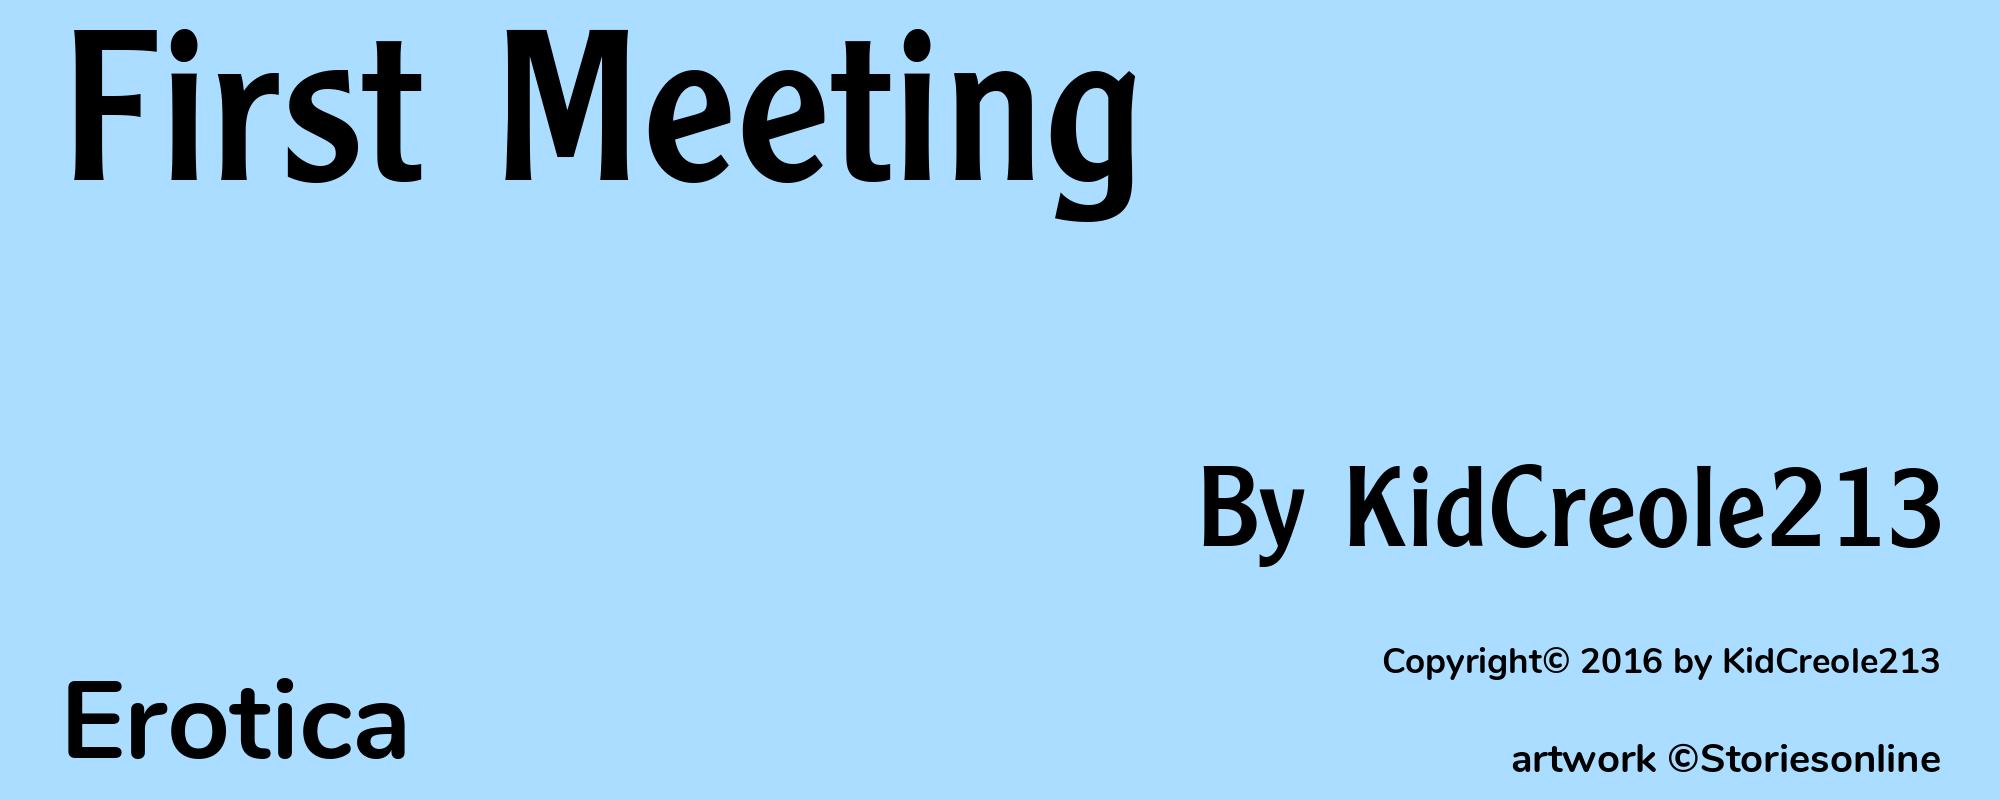 First Meeting - Cover